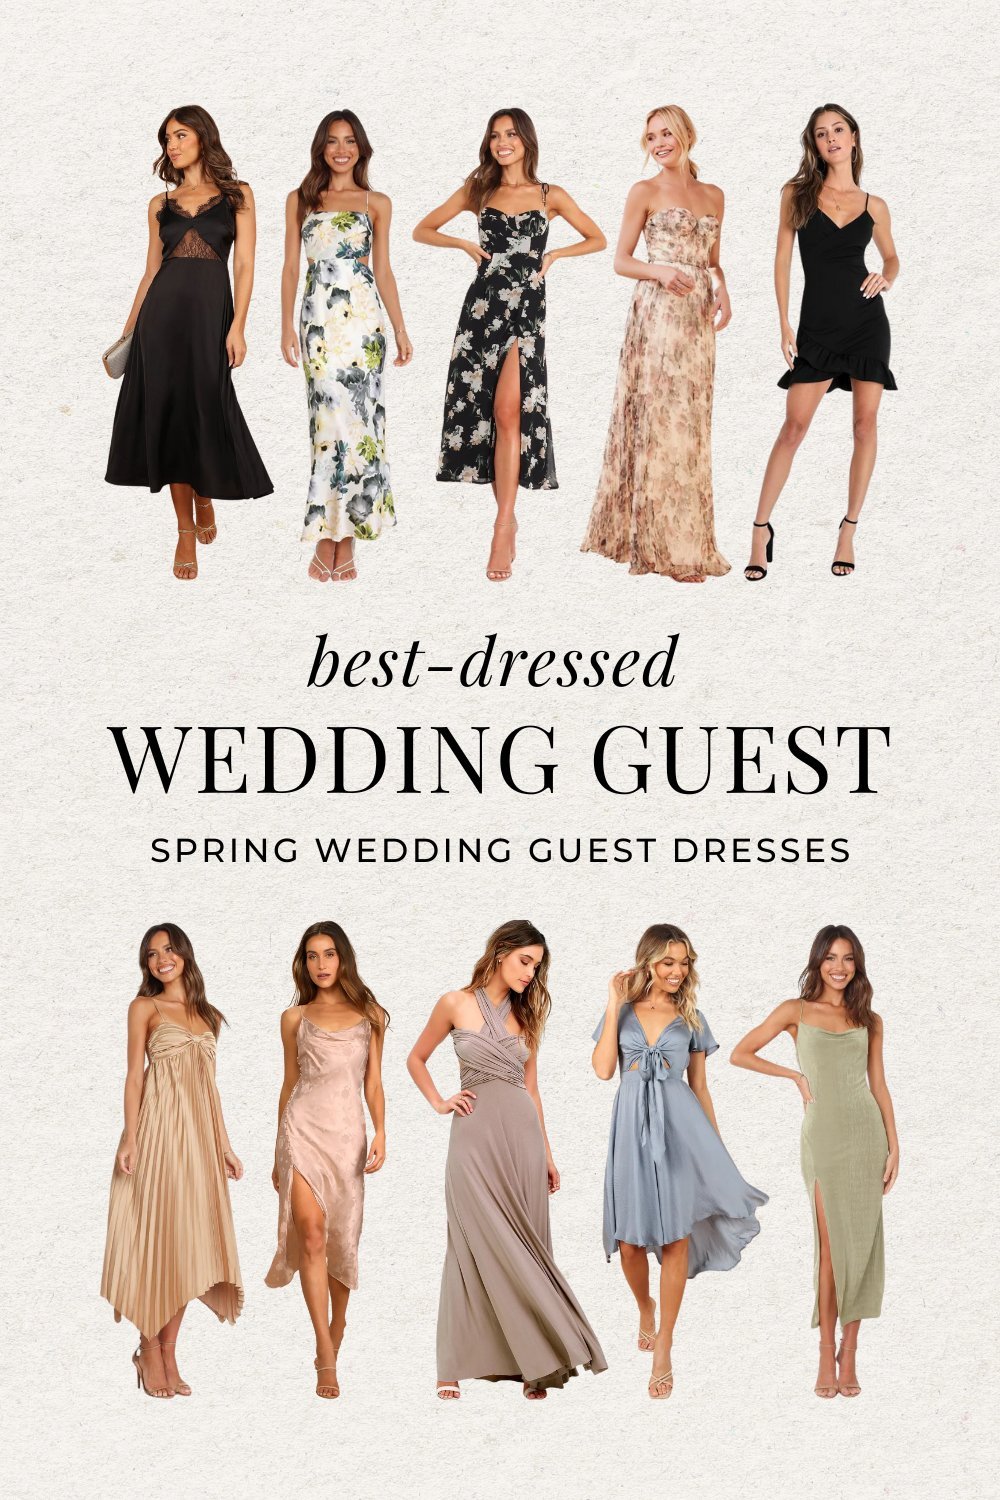 Spring fashion dresses that are affordable and perfect for wedding